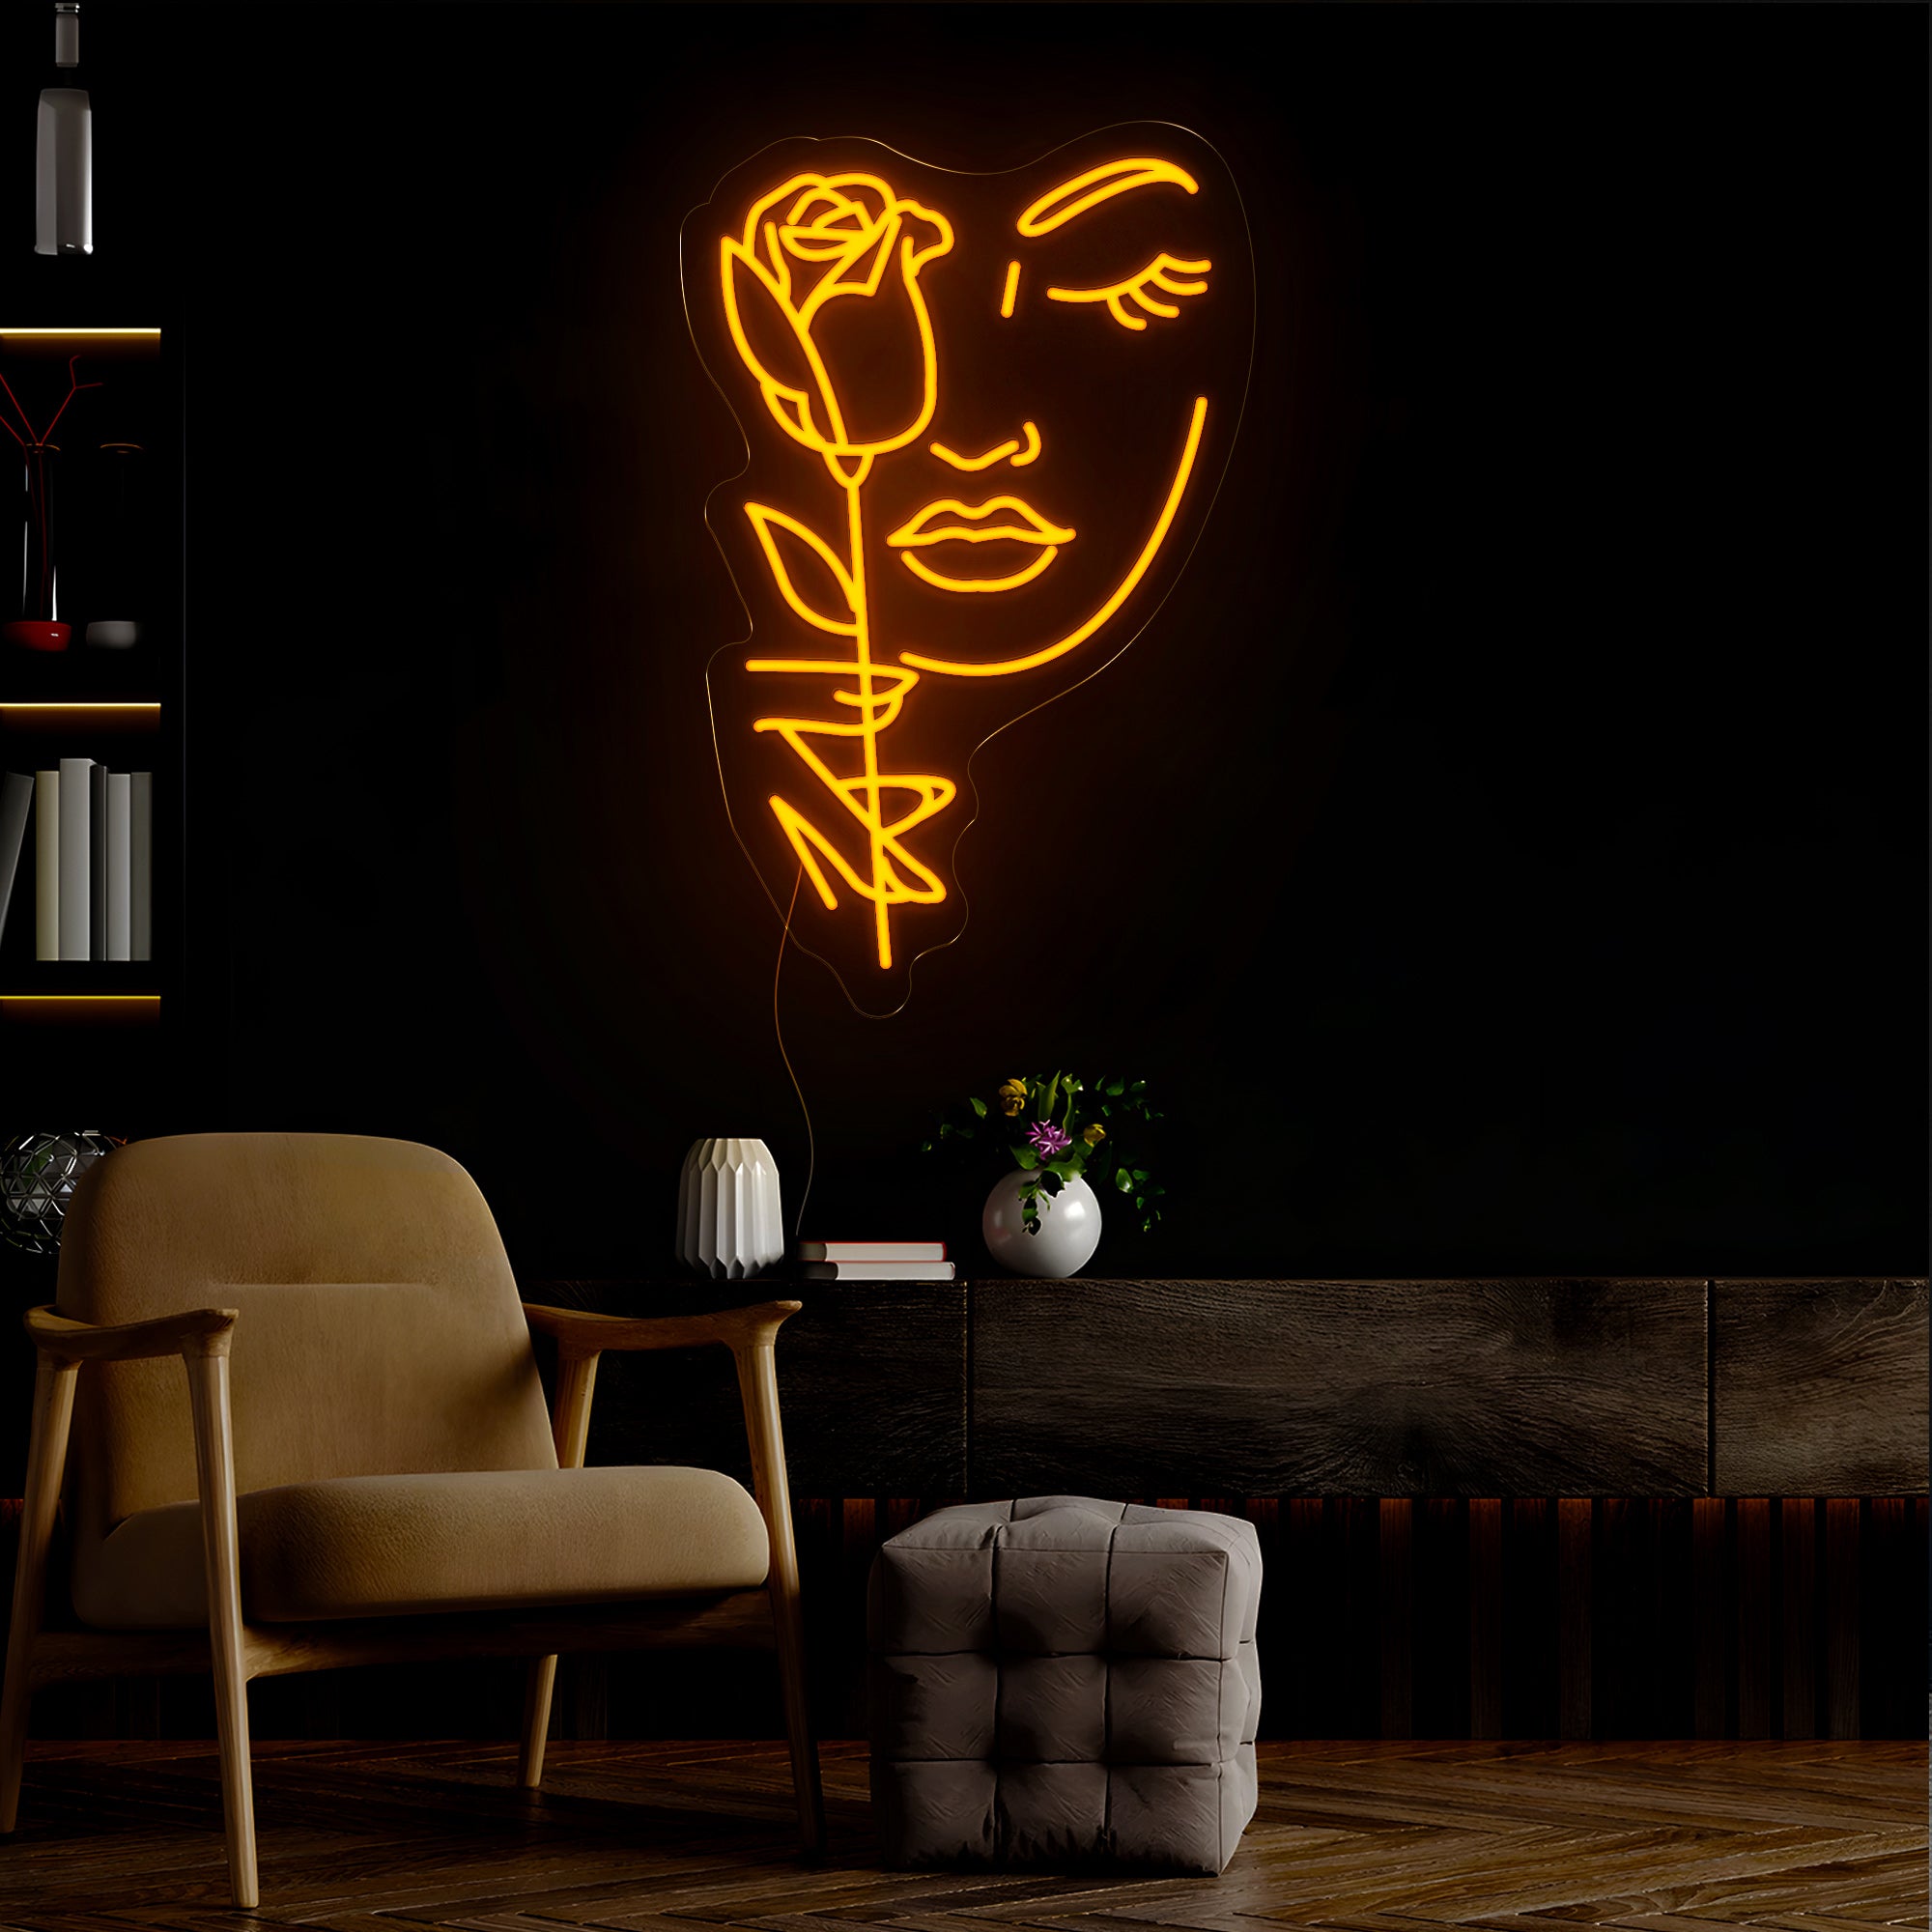 Woman Face And Rose Silhouette Neon Sign